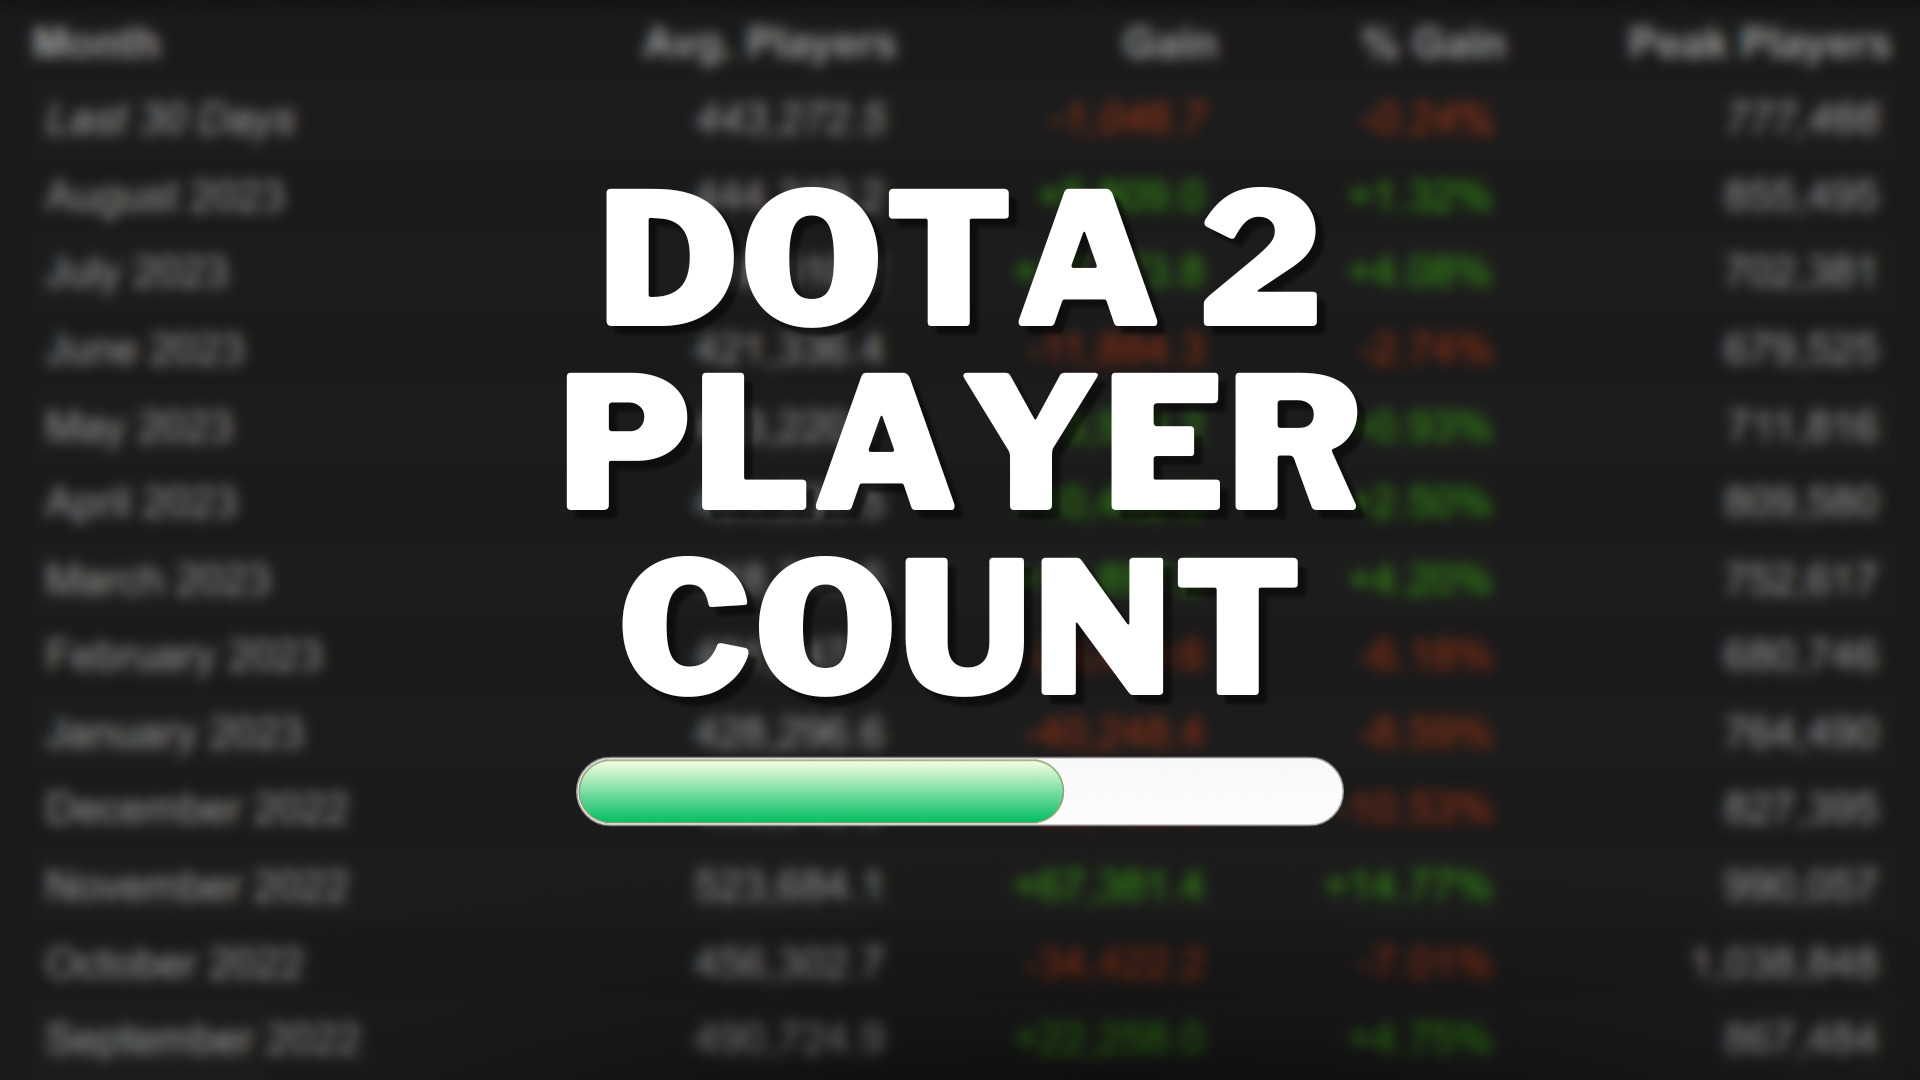 Valorant Player Count in 2023: How Many Players Are Play?